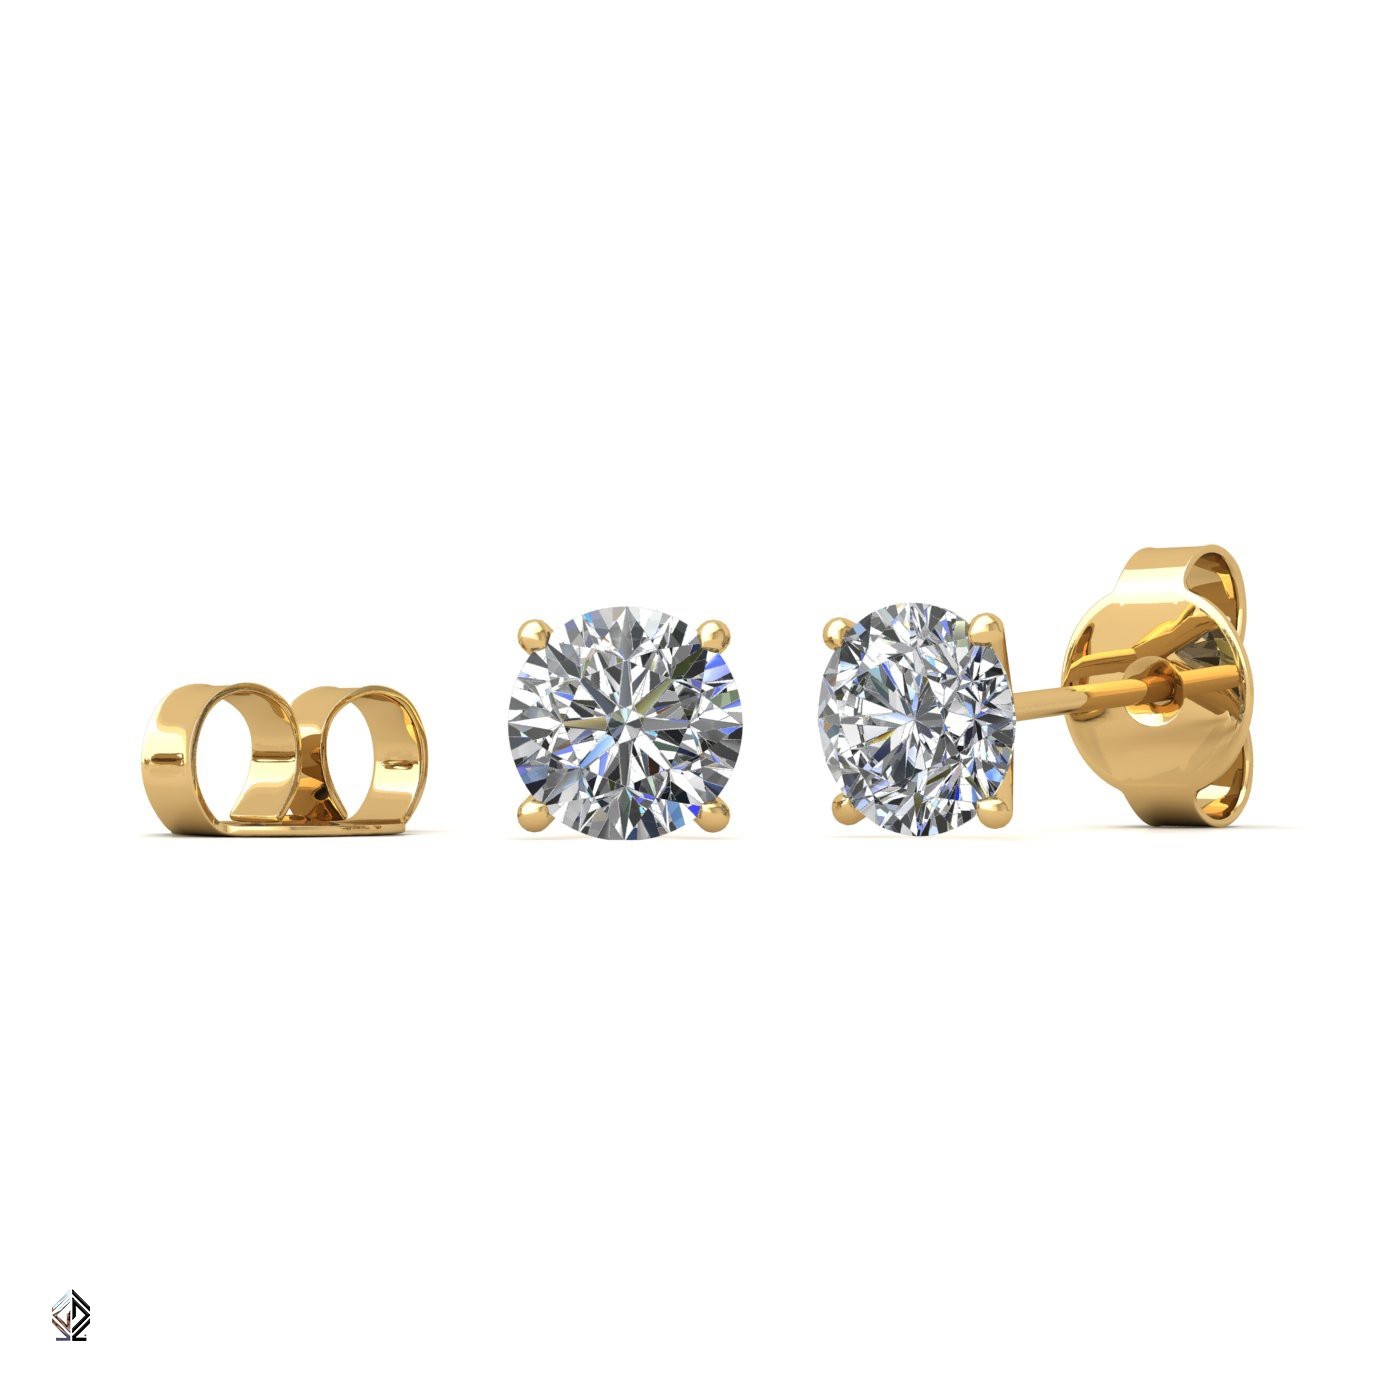 18k yellow gold 1.0 ct each (2,0 tcw) 4 prongs round cut classic diamond earring studs Photos & images